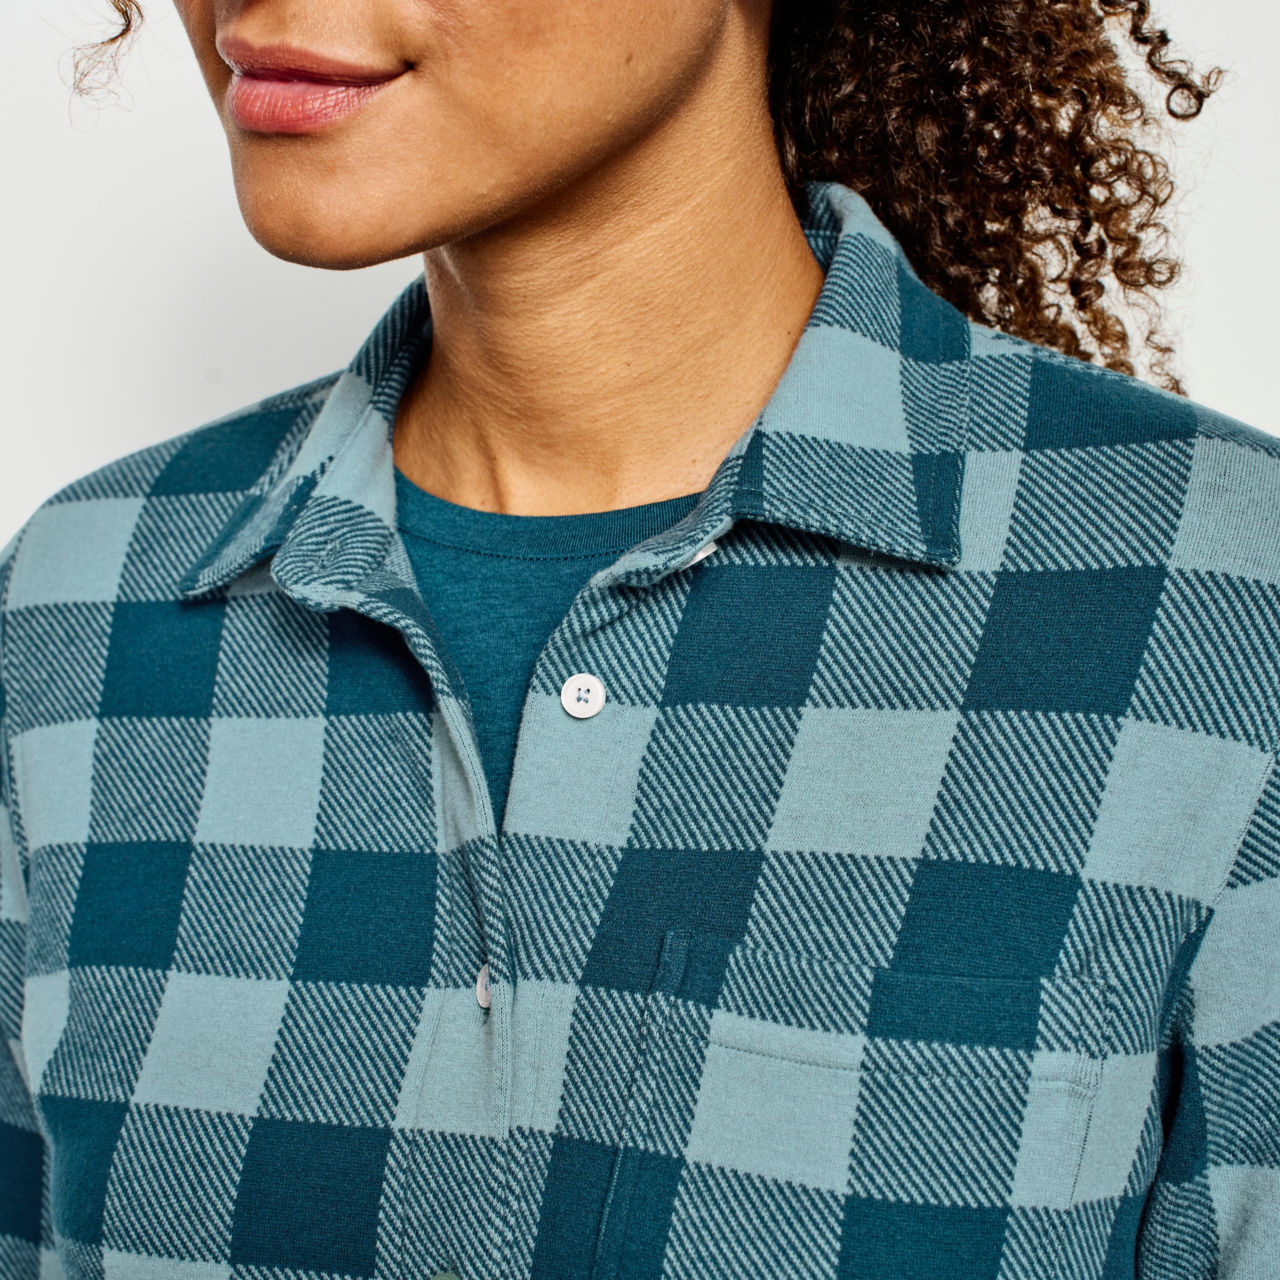 Snowy River Brushed Knit Long-Sleeved Shirt - MINERAL BLUE PLAID image number 6